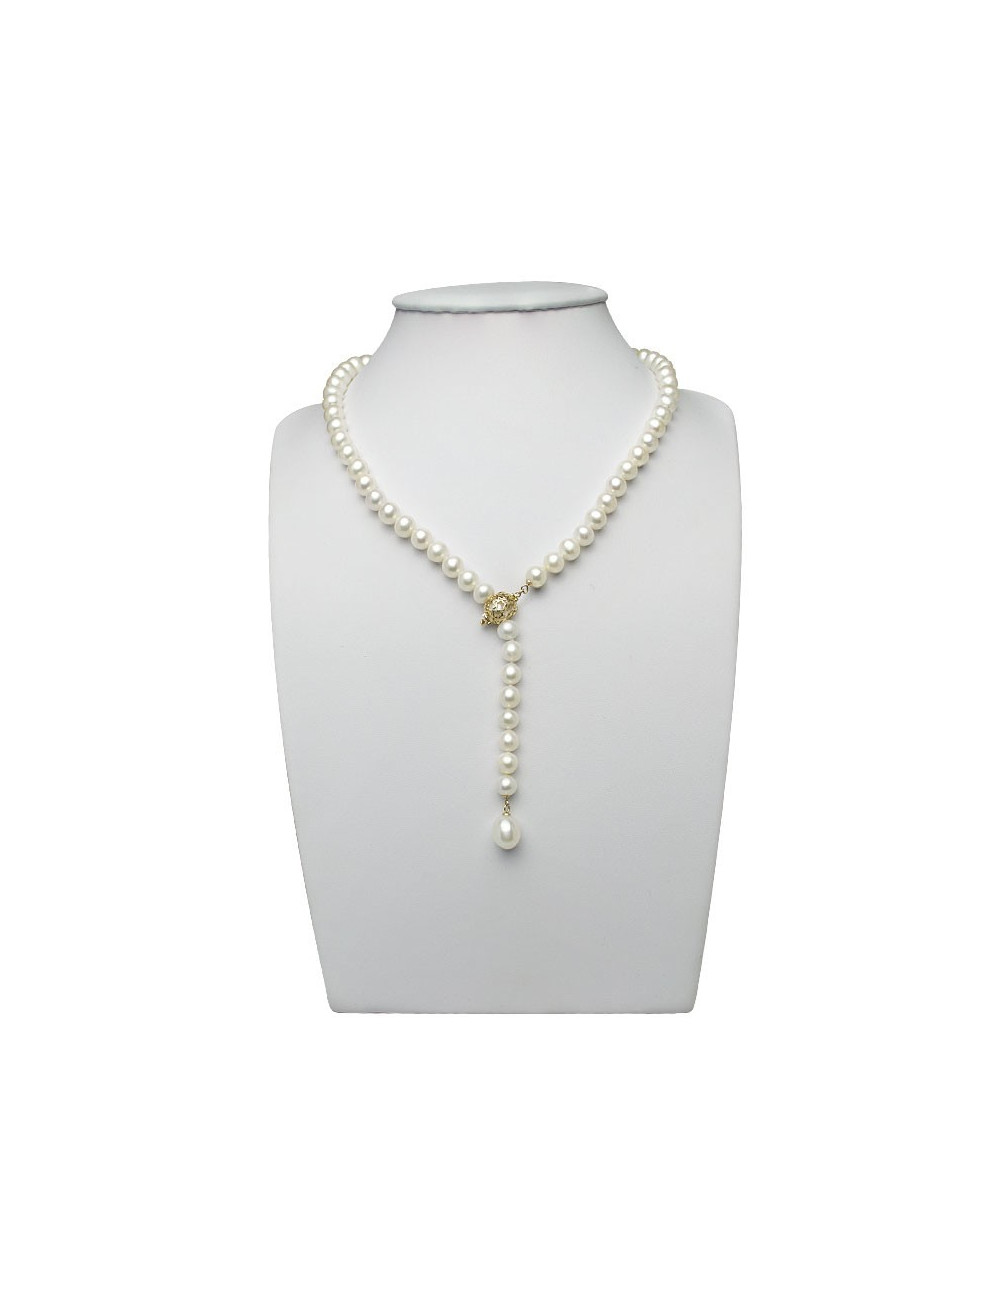 Gold pearl necklace with decorative clasp NO7580G